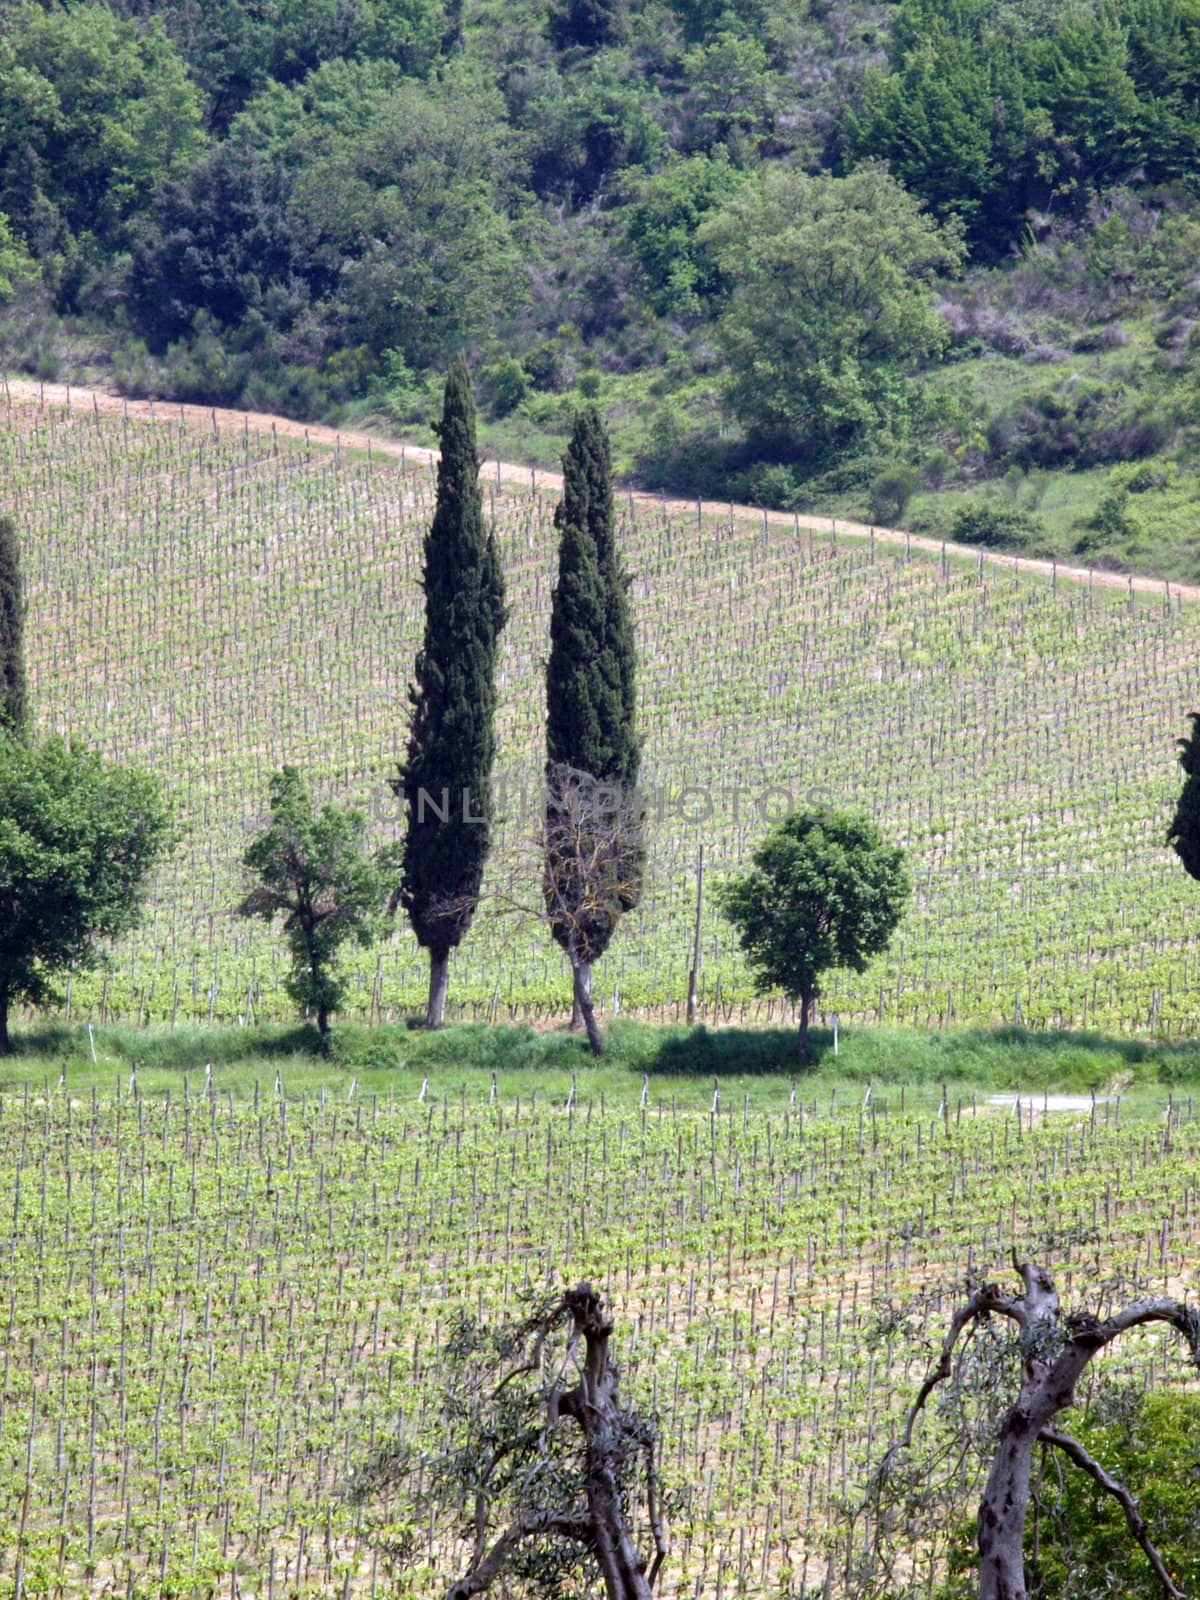 Tuscan landscape with vineyards, olive trees and cypresses by wjarek